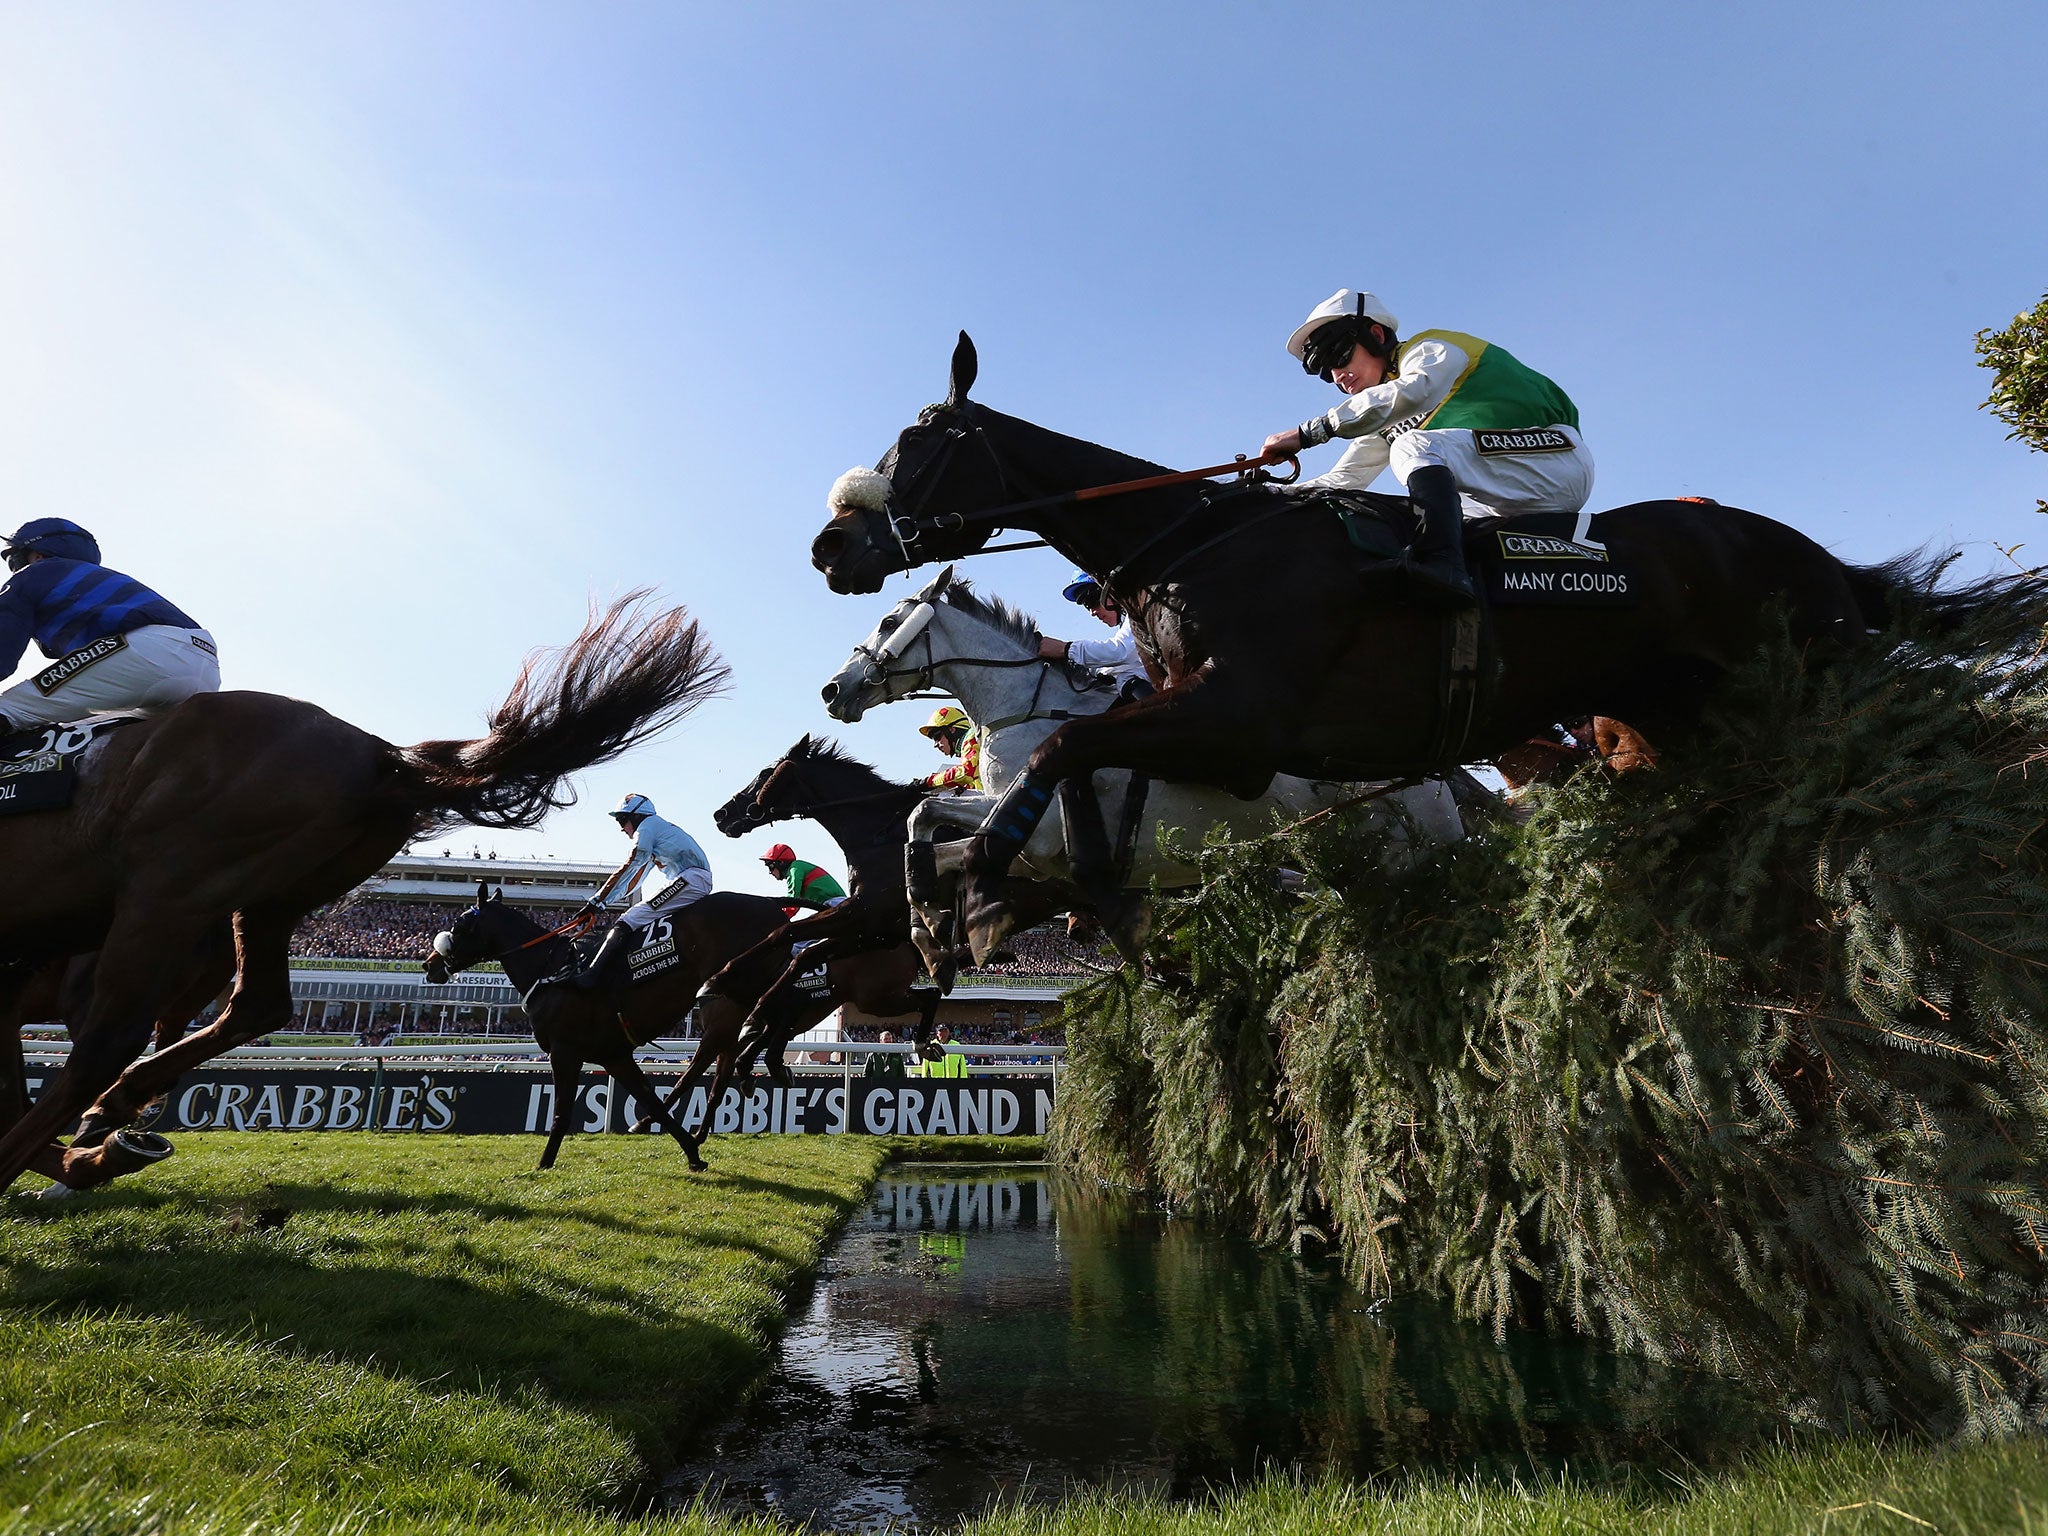 Eventual winner Many Clouds leaps over the Water Jump